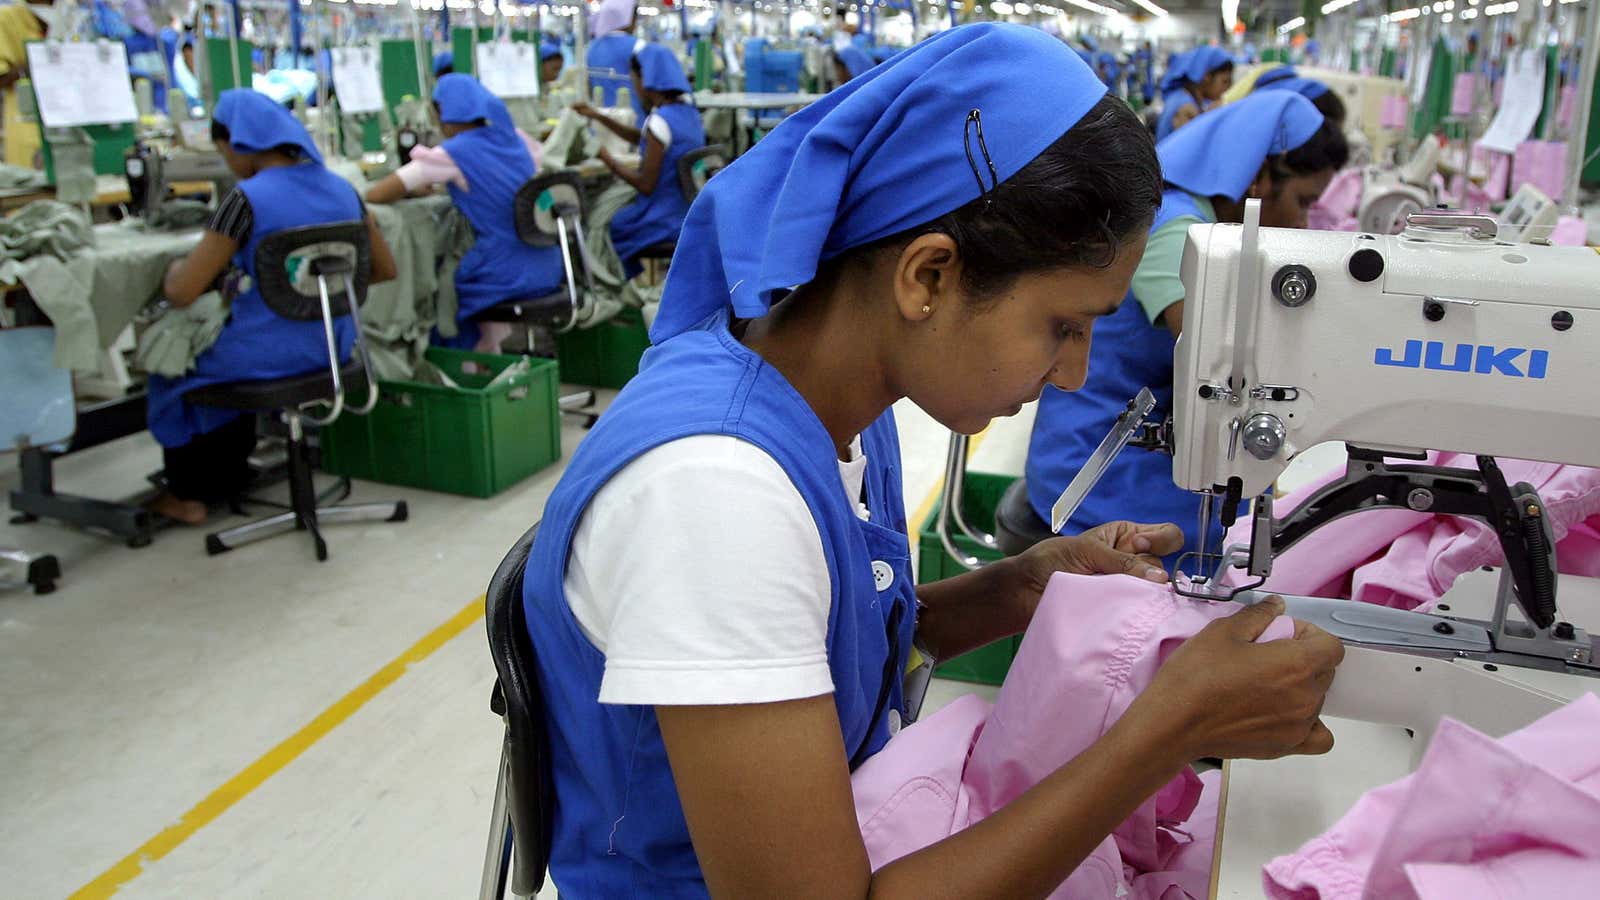 Mauritius has long imported workers for developing countries to work in its factories.